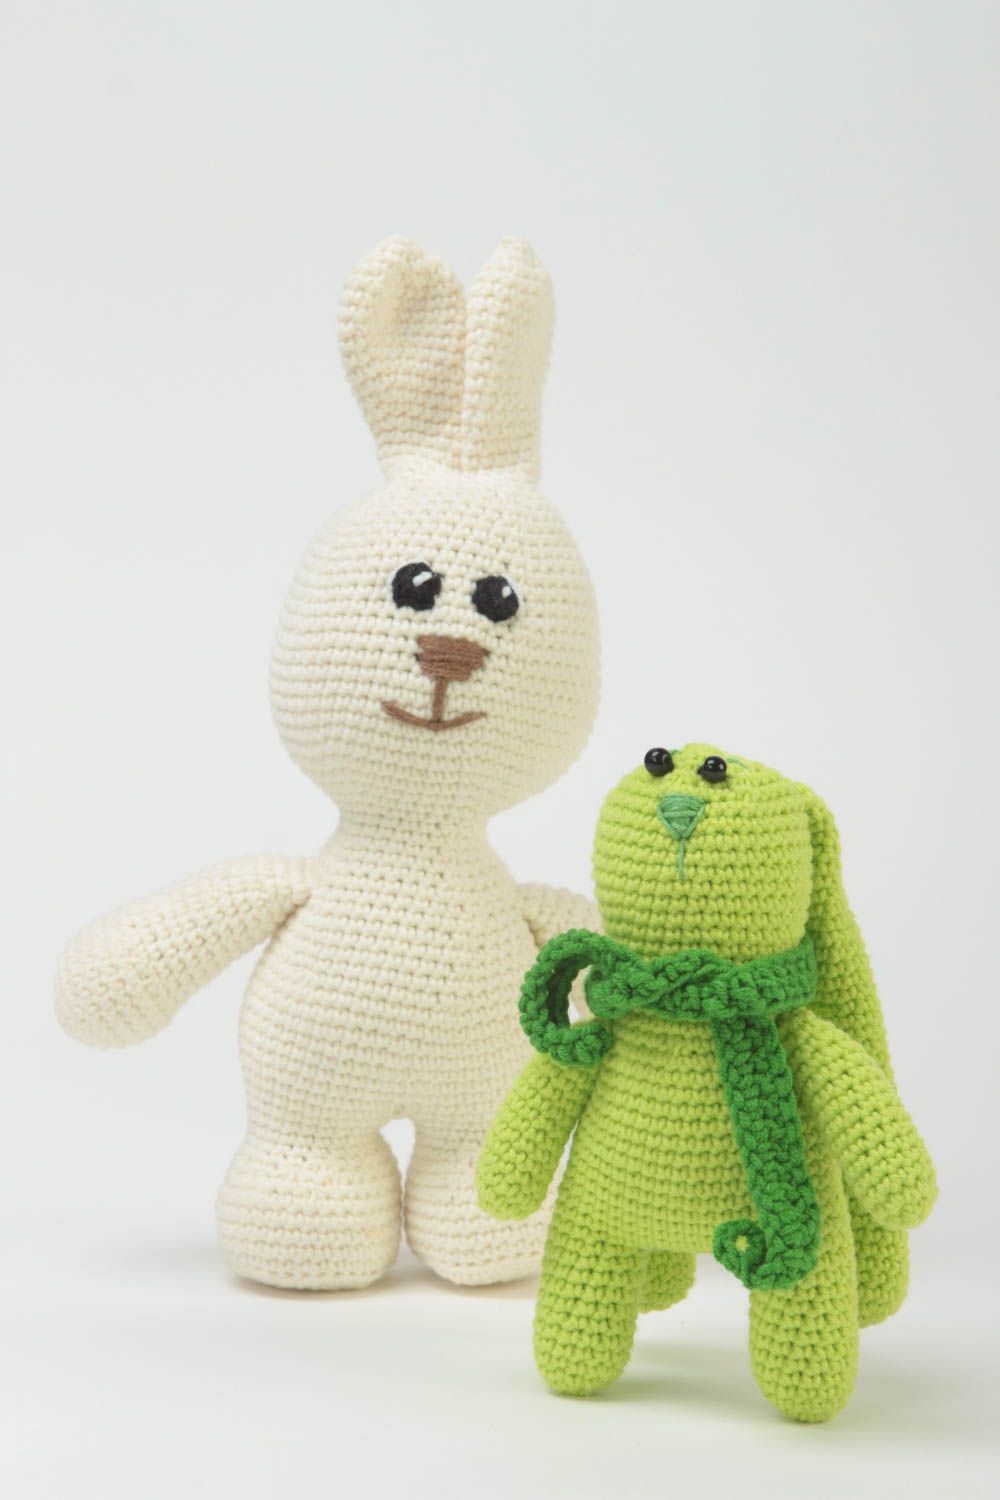 Beautiful handmade soft toy crochet toy 2 pieces best toys for kids gift ideas photo 2